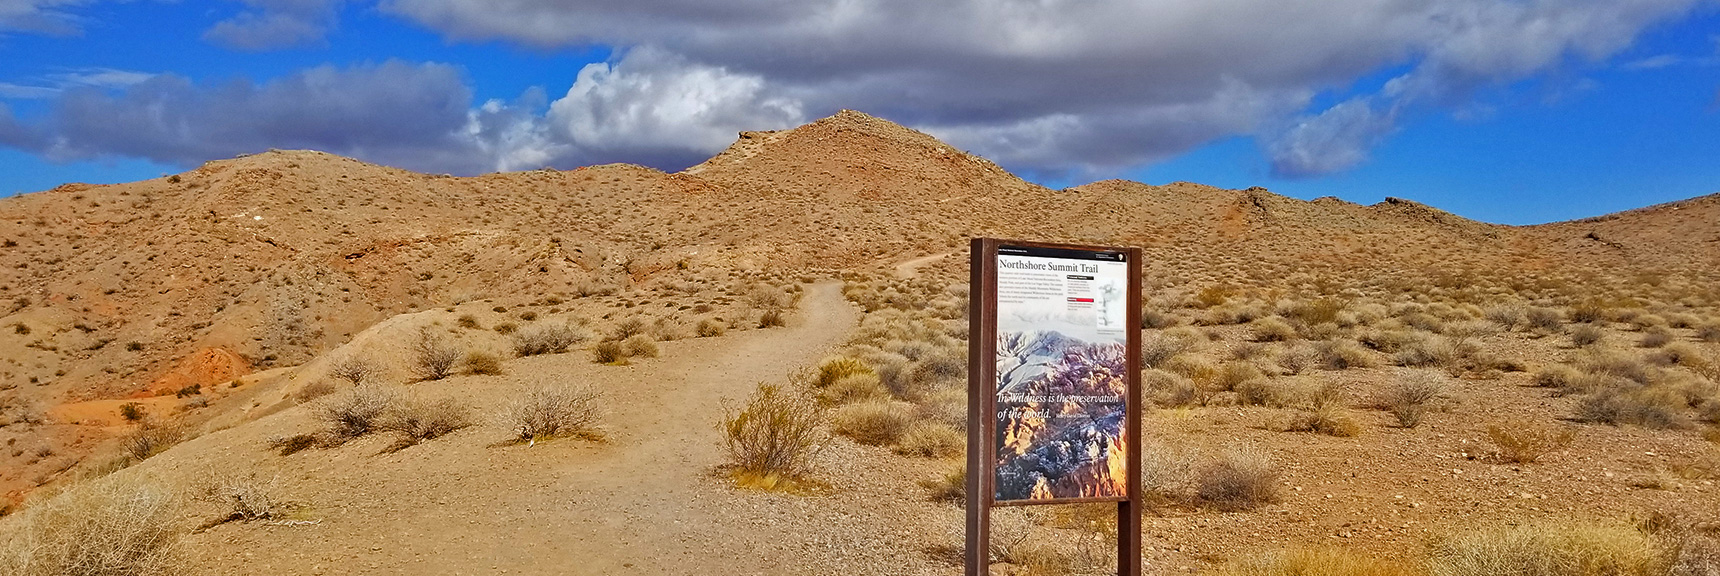 Trailhead to Northshore Summit and the Northern Bowl of Fire Beyond | Northern Bowl of Fire | Lake Mead National Recreation Area, Nevada